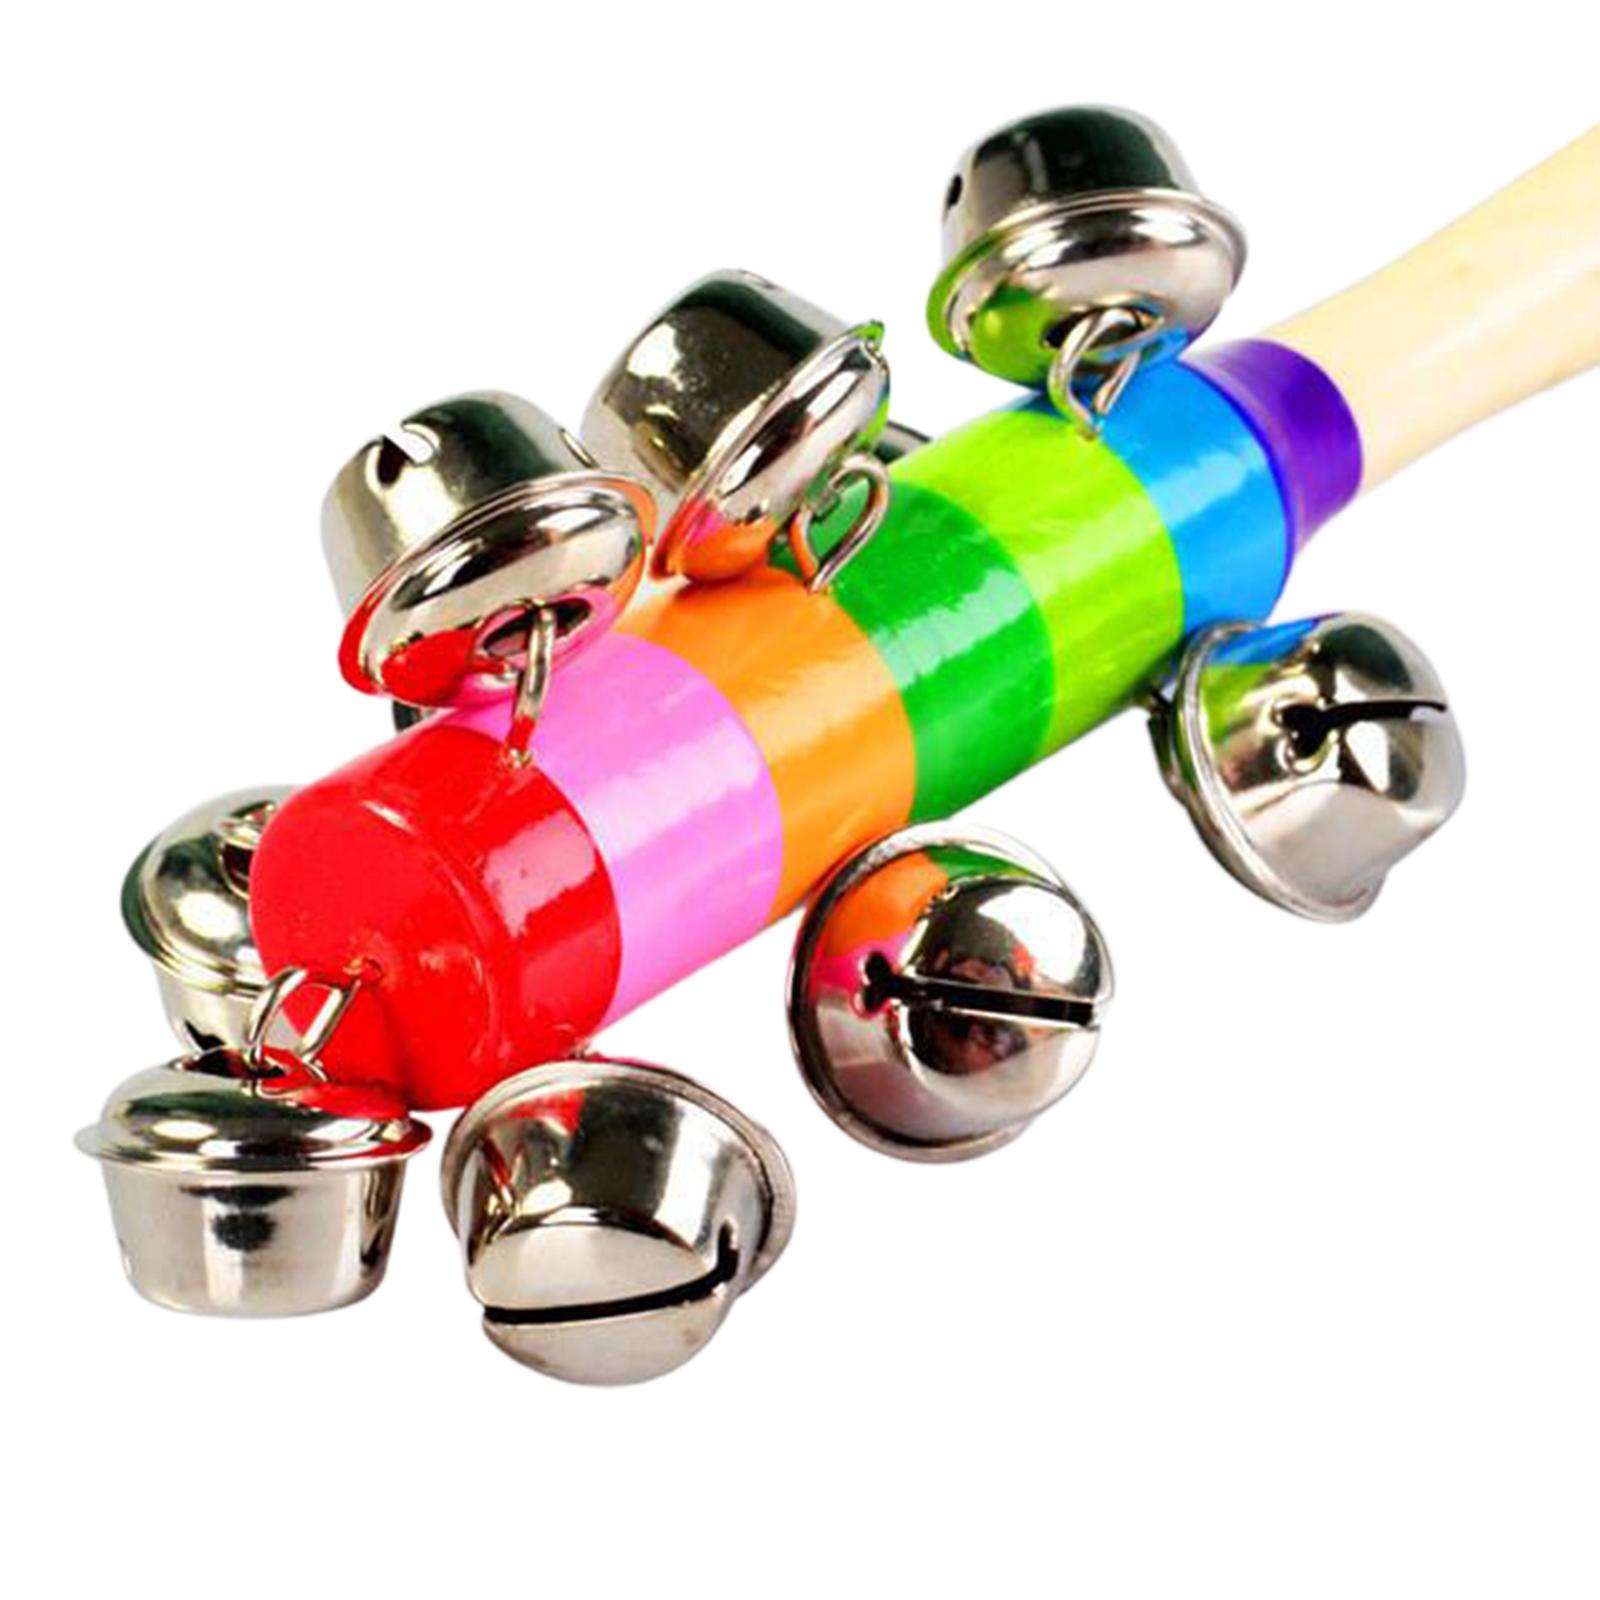 3x Sleigh Bells Stick Hand Held with 10 Jingles Ball Musical Percussion Toy